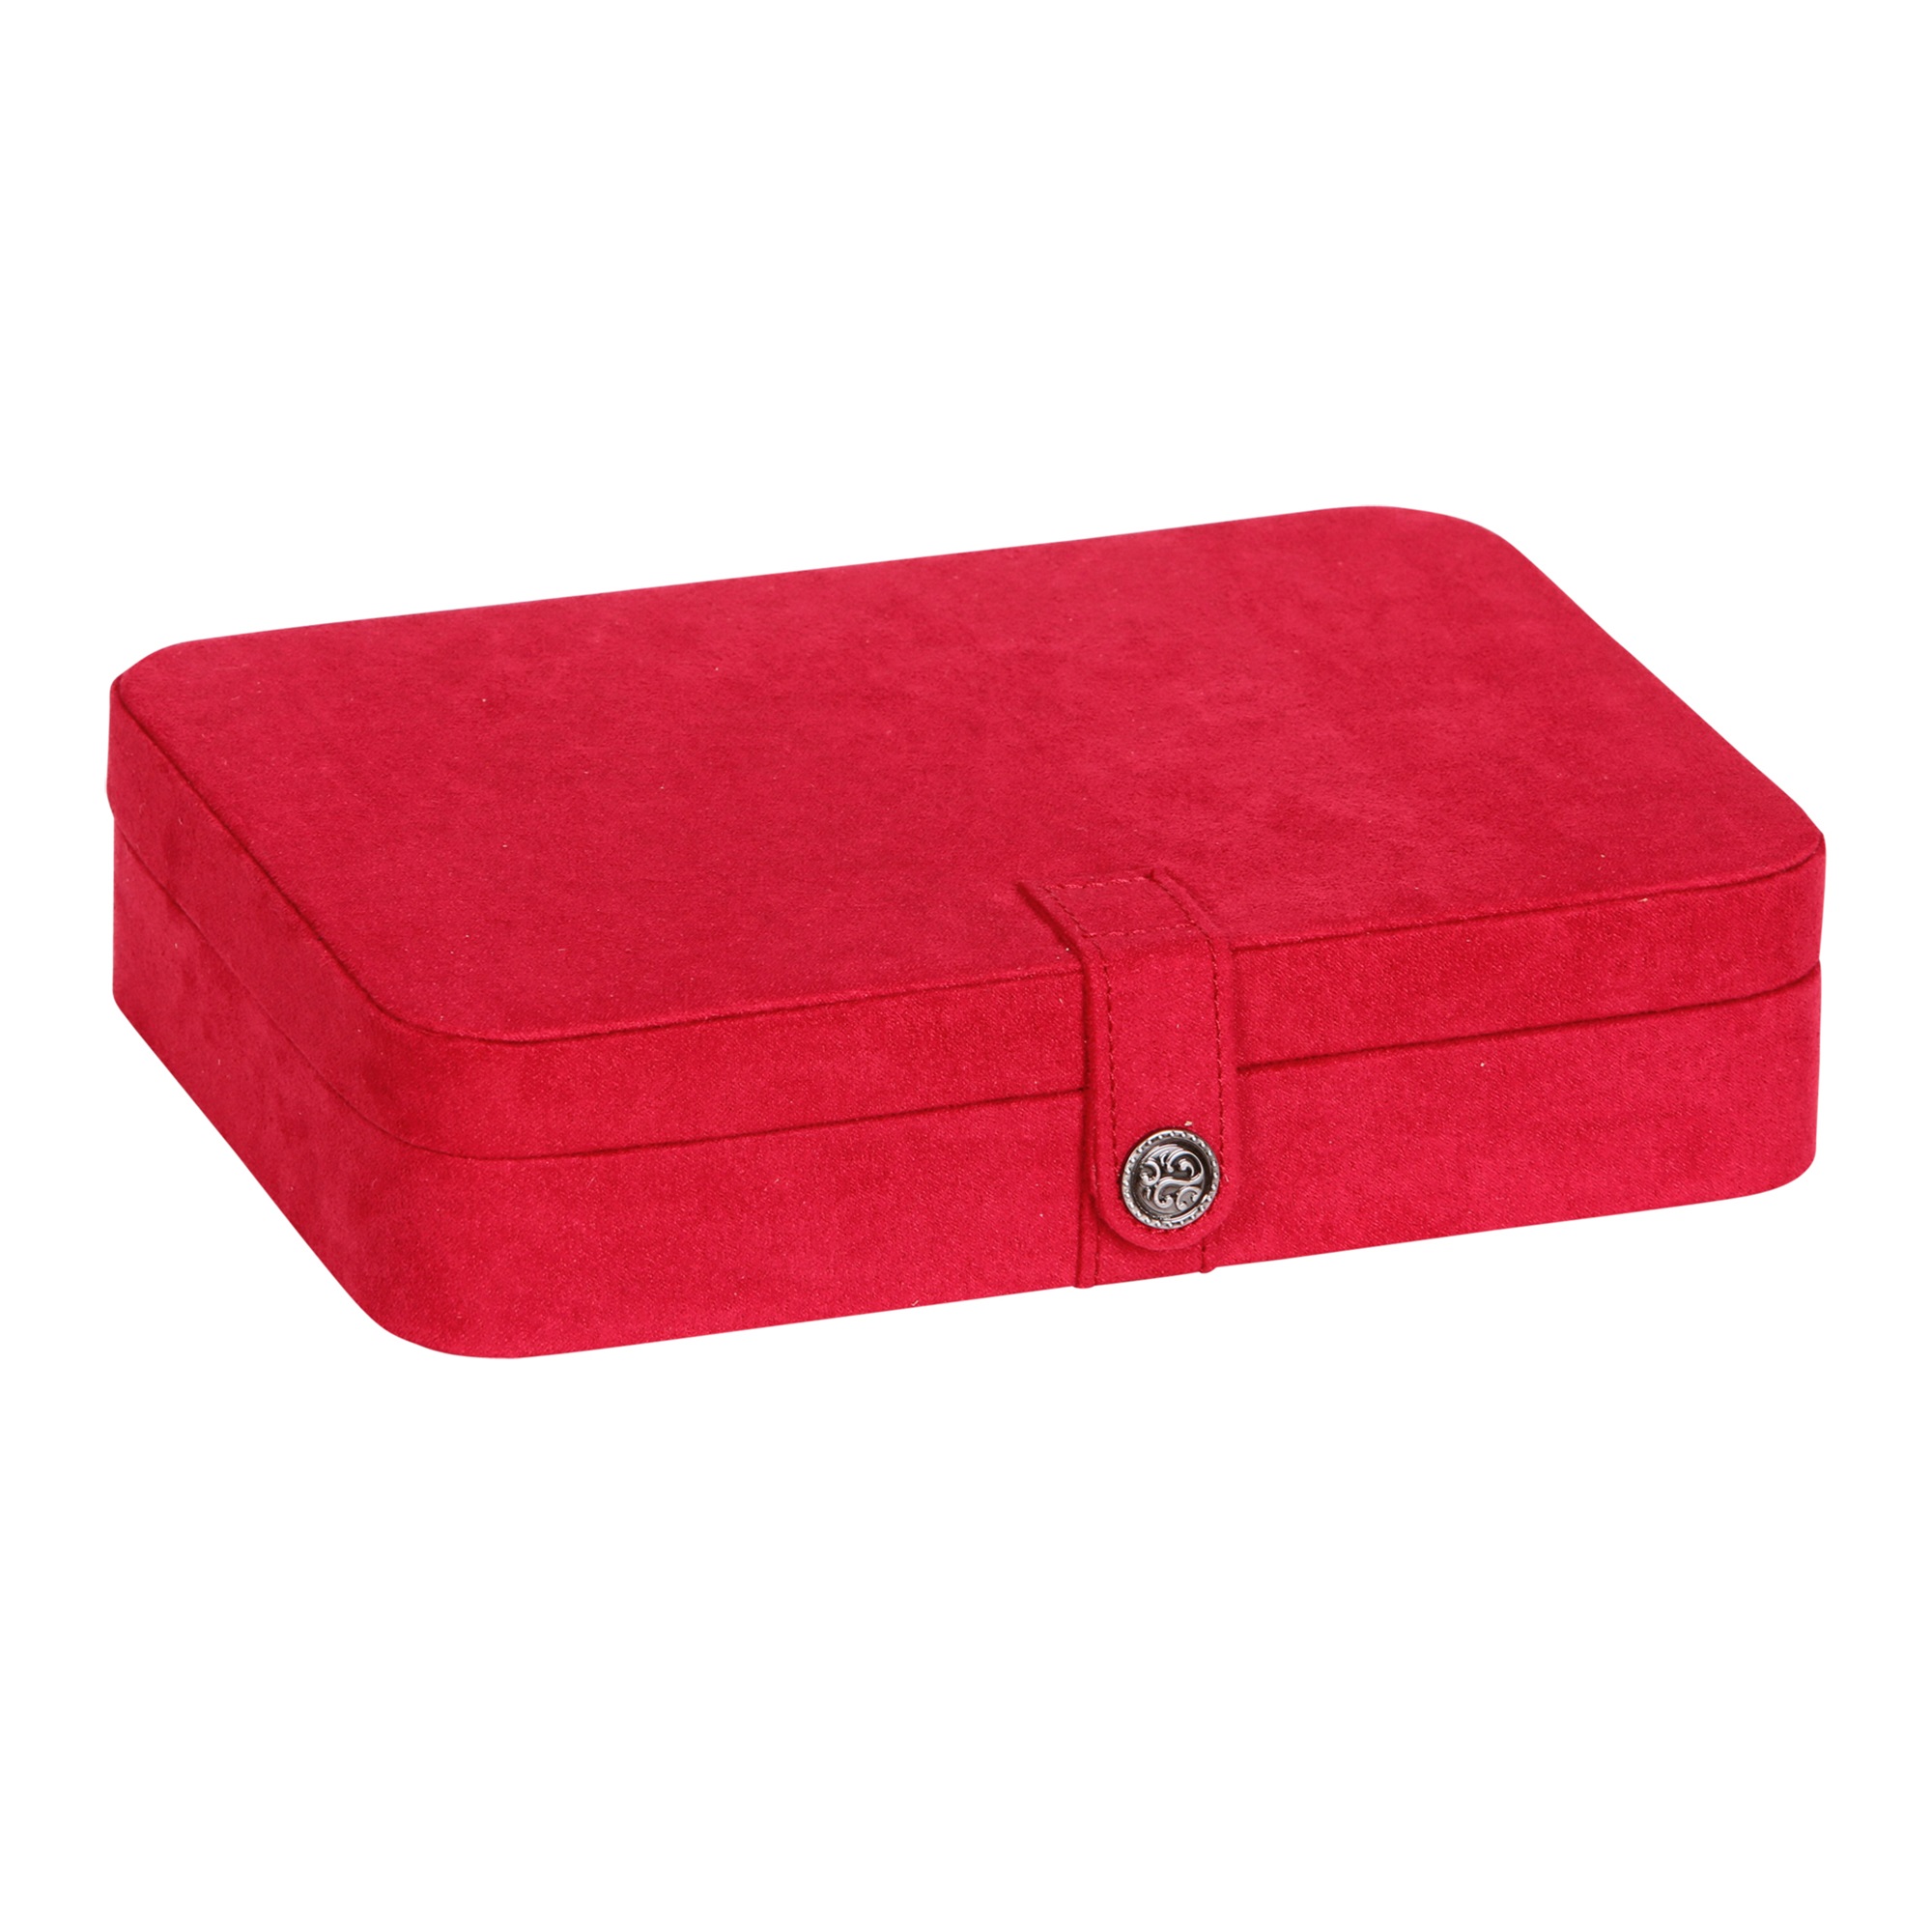 Mele and Co Maria Plush Fabric Jewelry Box with Twenty-Four Sections in Red